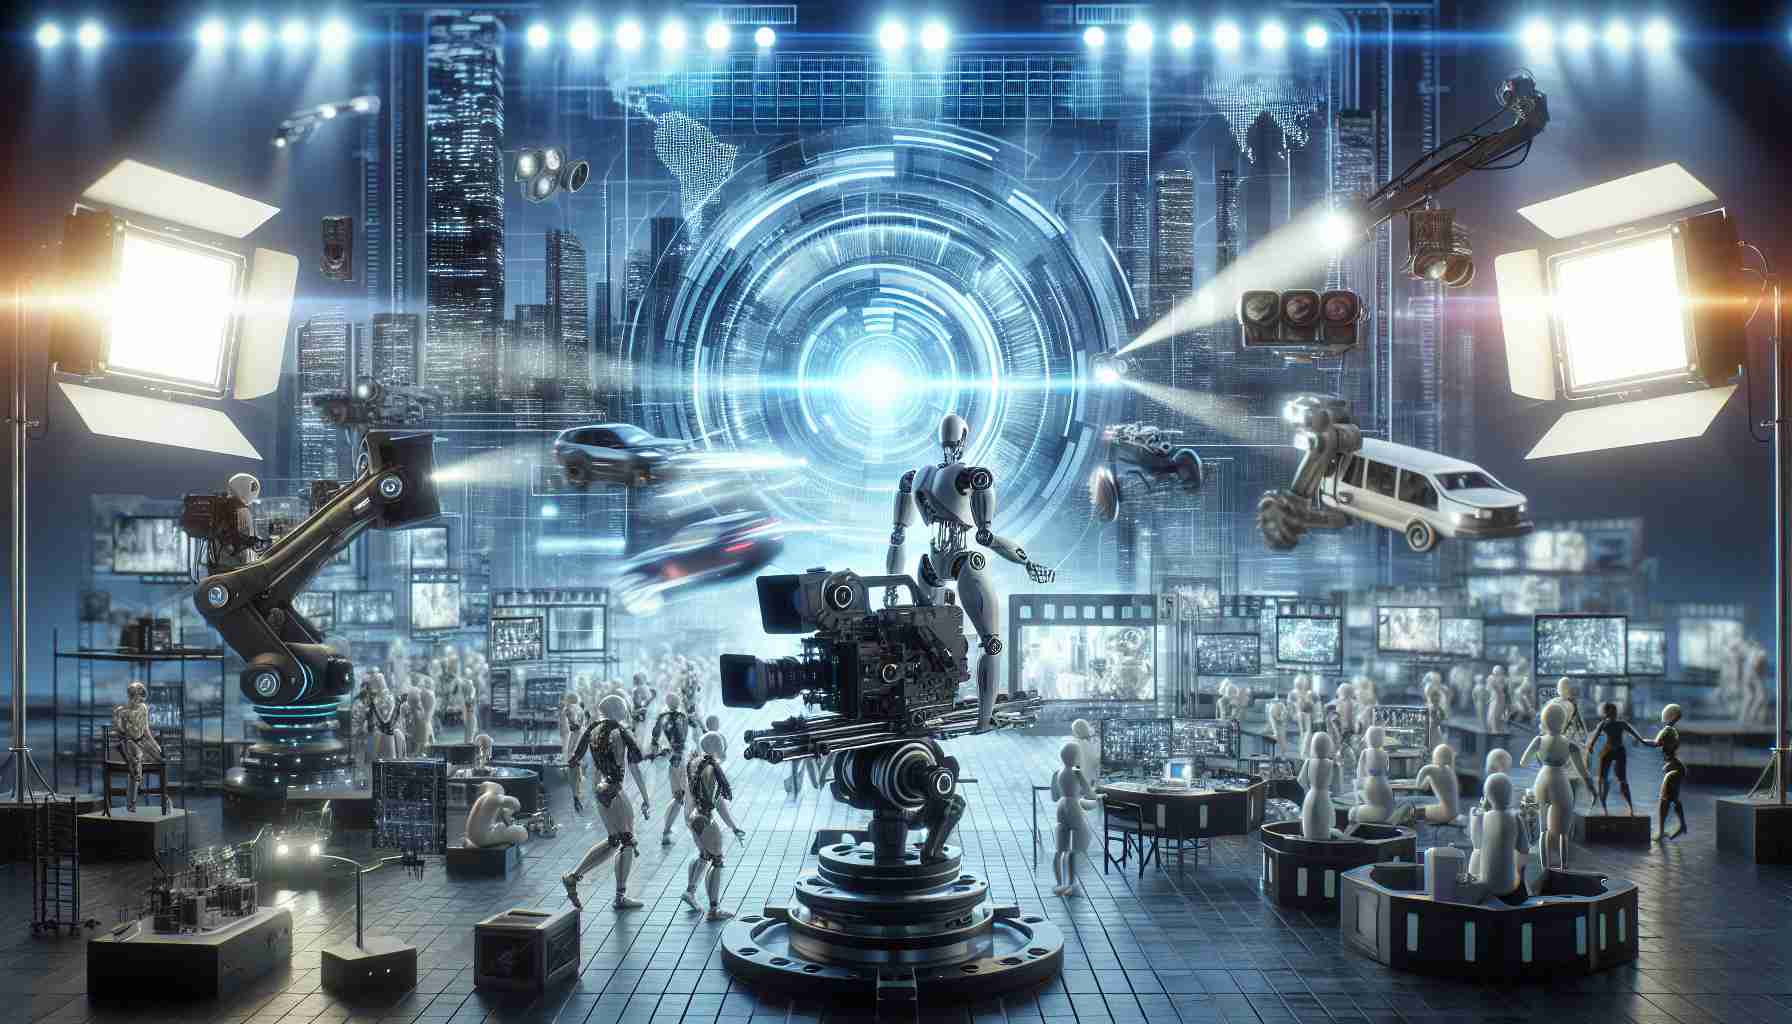 A Leap into the Future: The Film Industry Embraces the Age of Artificial Intelligence